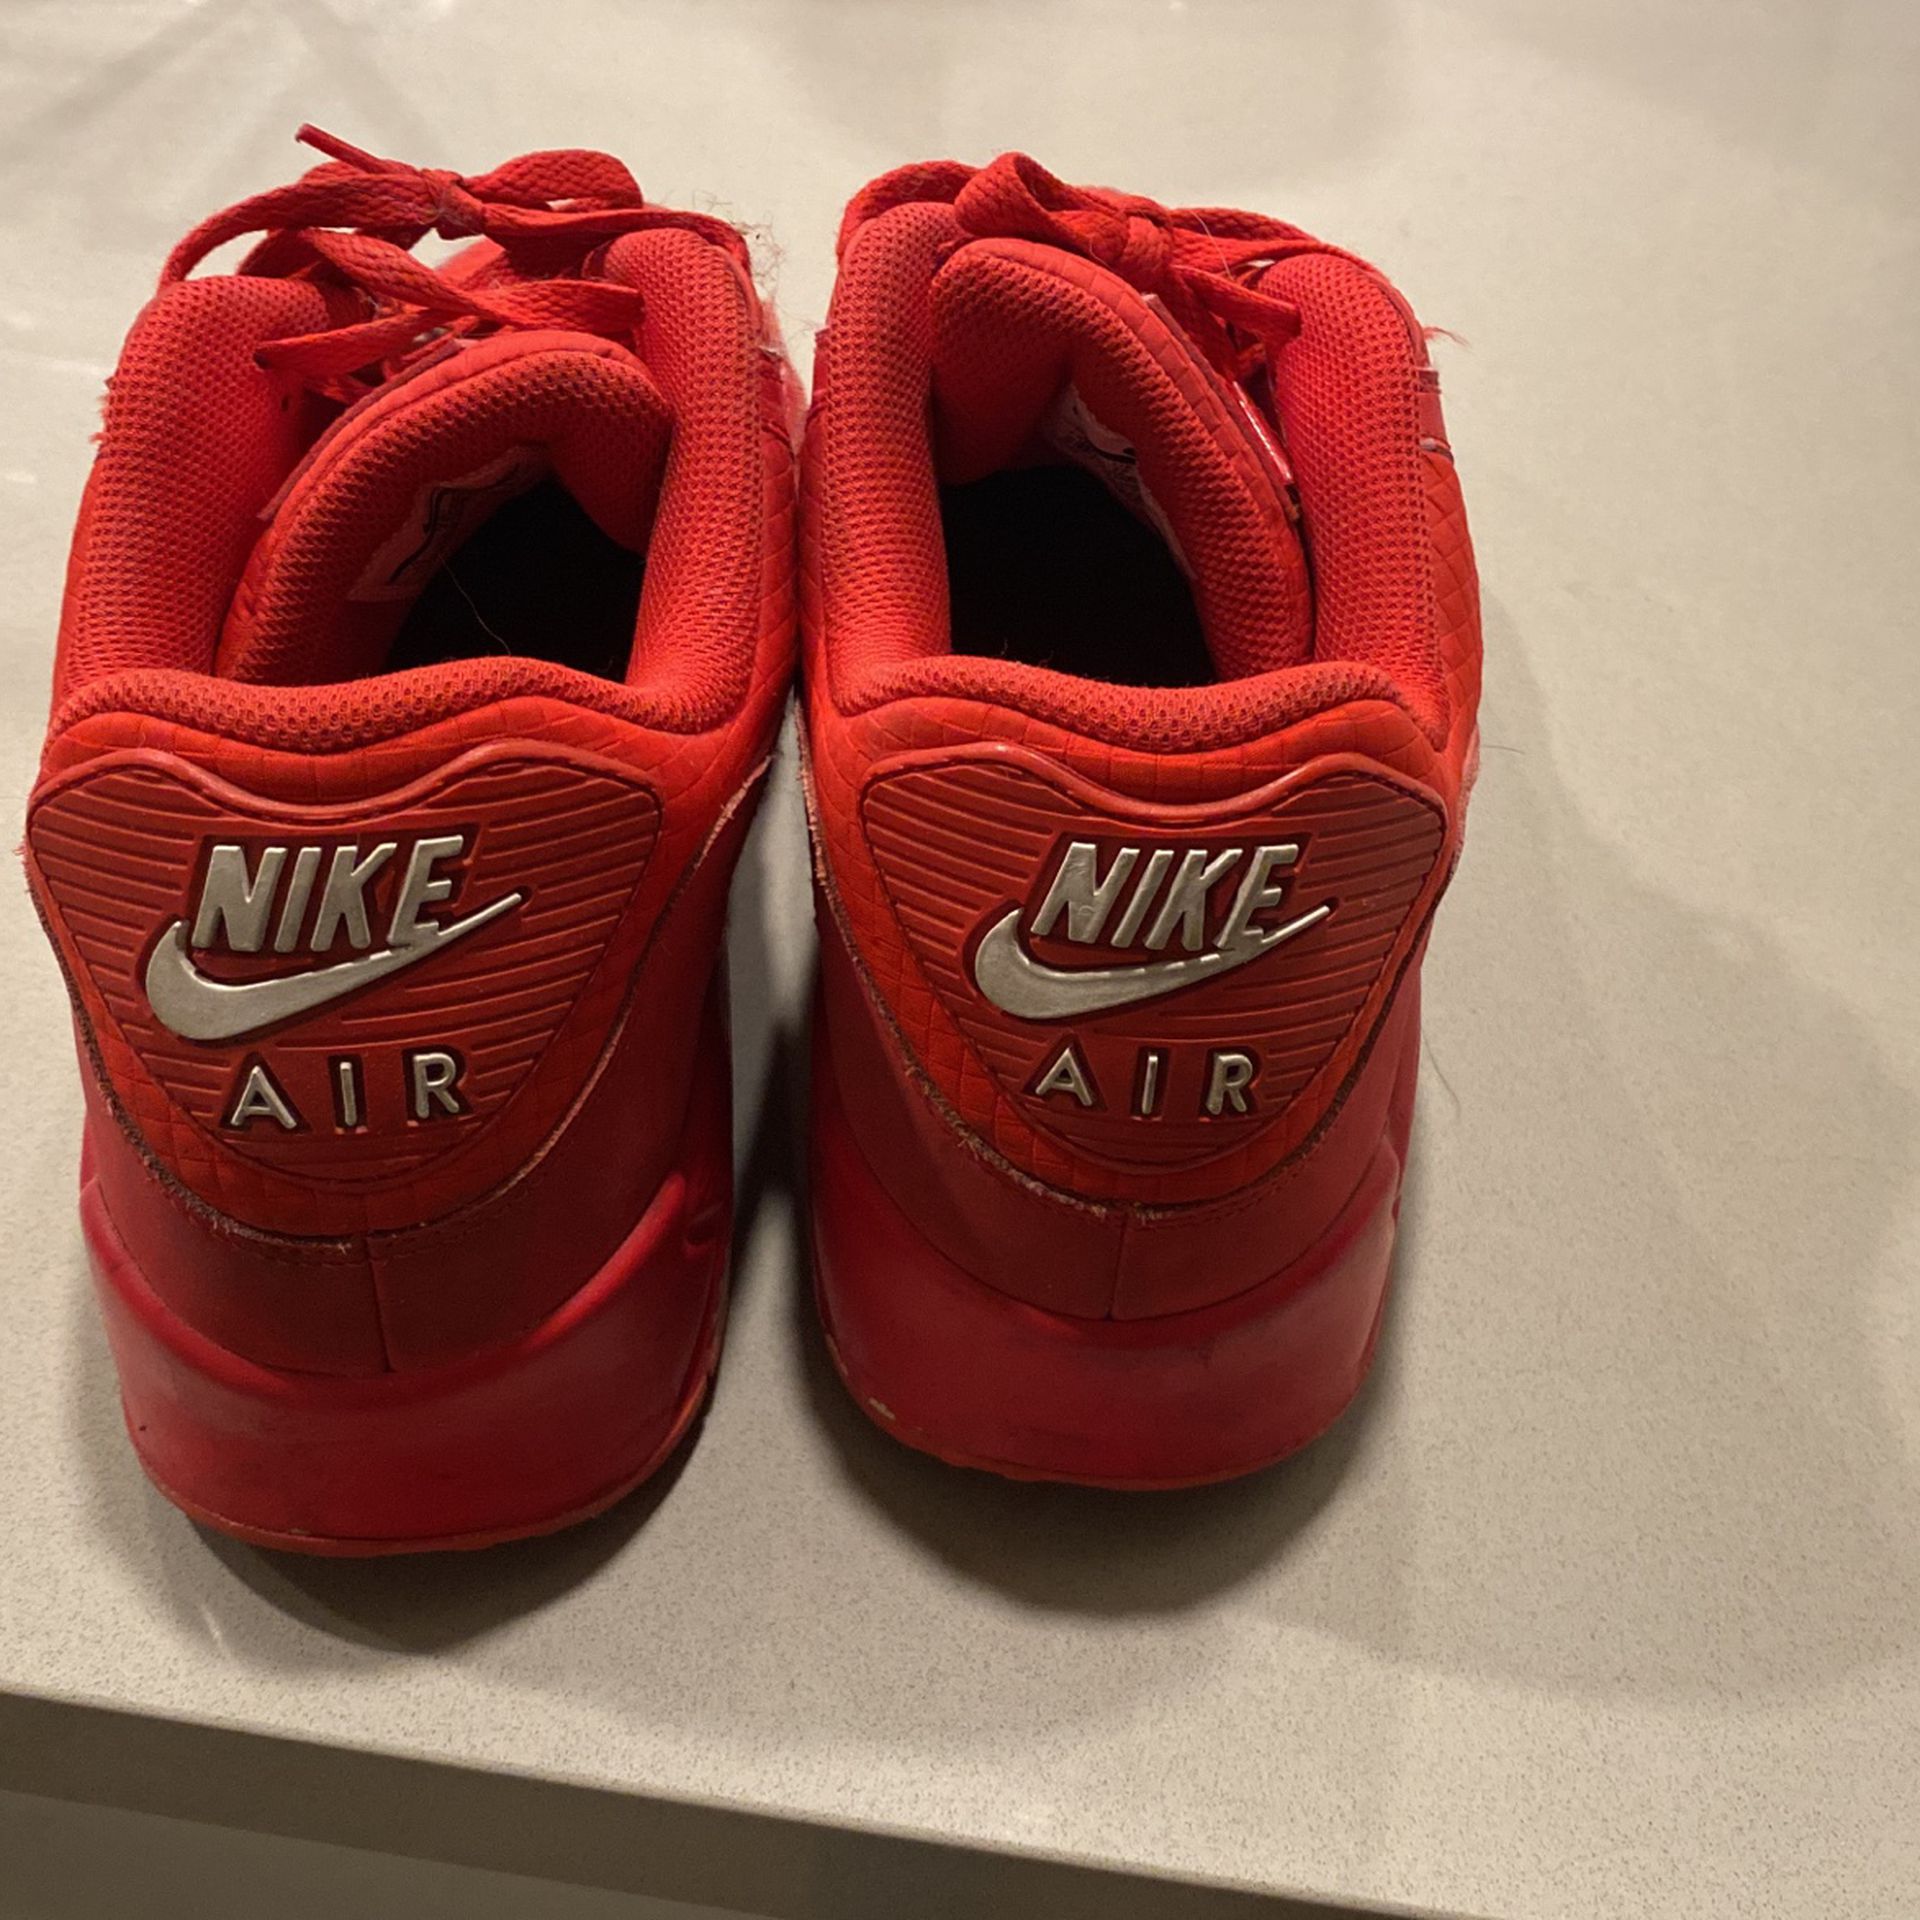 1993 Nike Air Raid 2 for Sale in Tacoma, WA - OfferUp